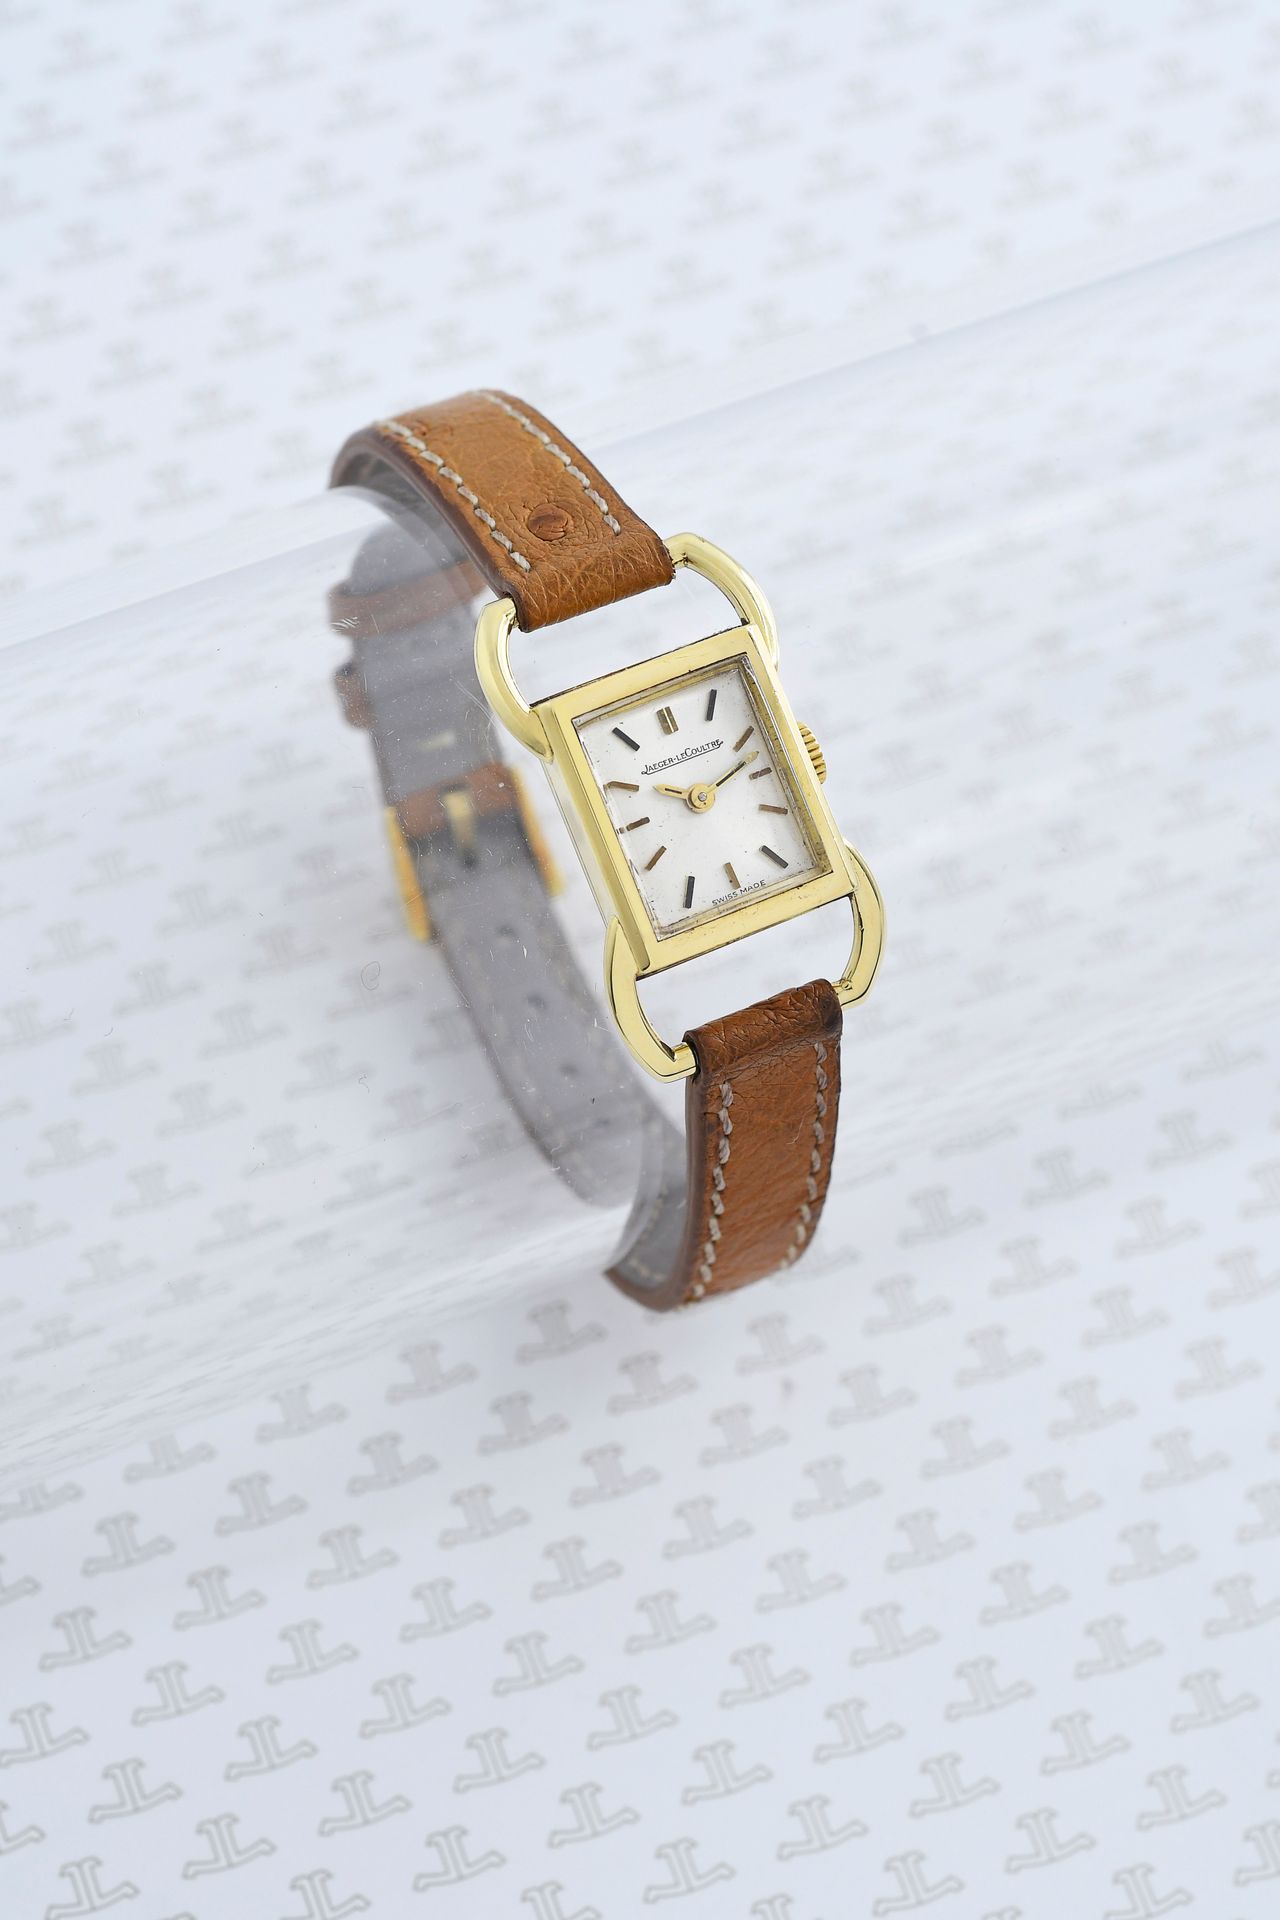 Null JAEGER-LECOULTRE (BABY STRIER / LADY - YELLOW GOLD No. 1101011A), circa 195&hellip;